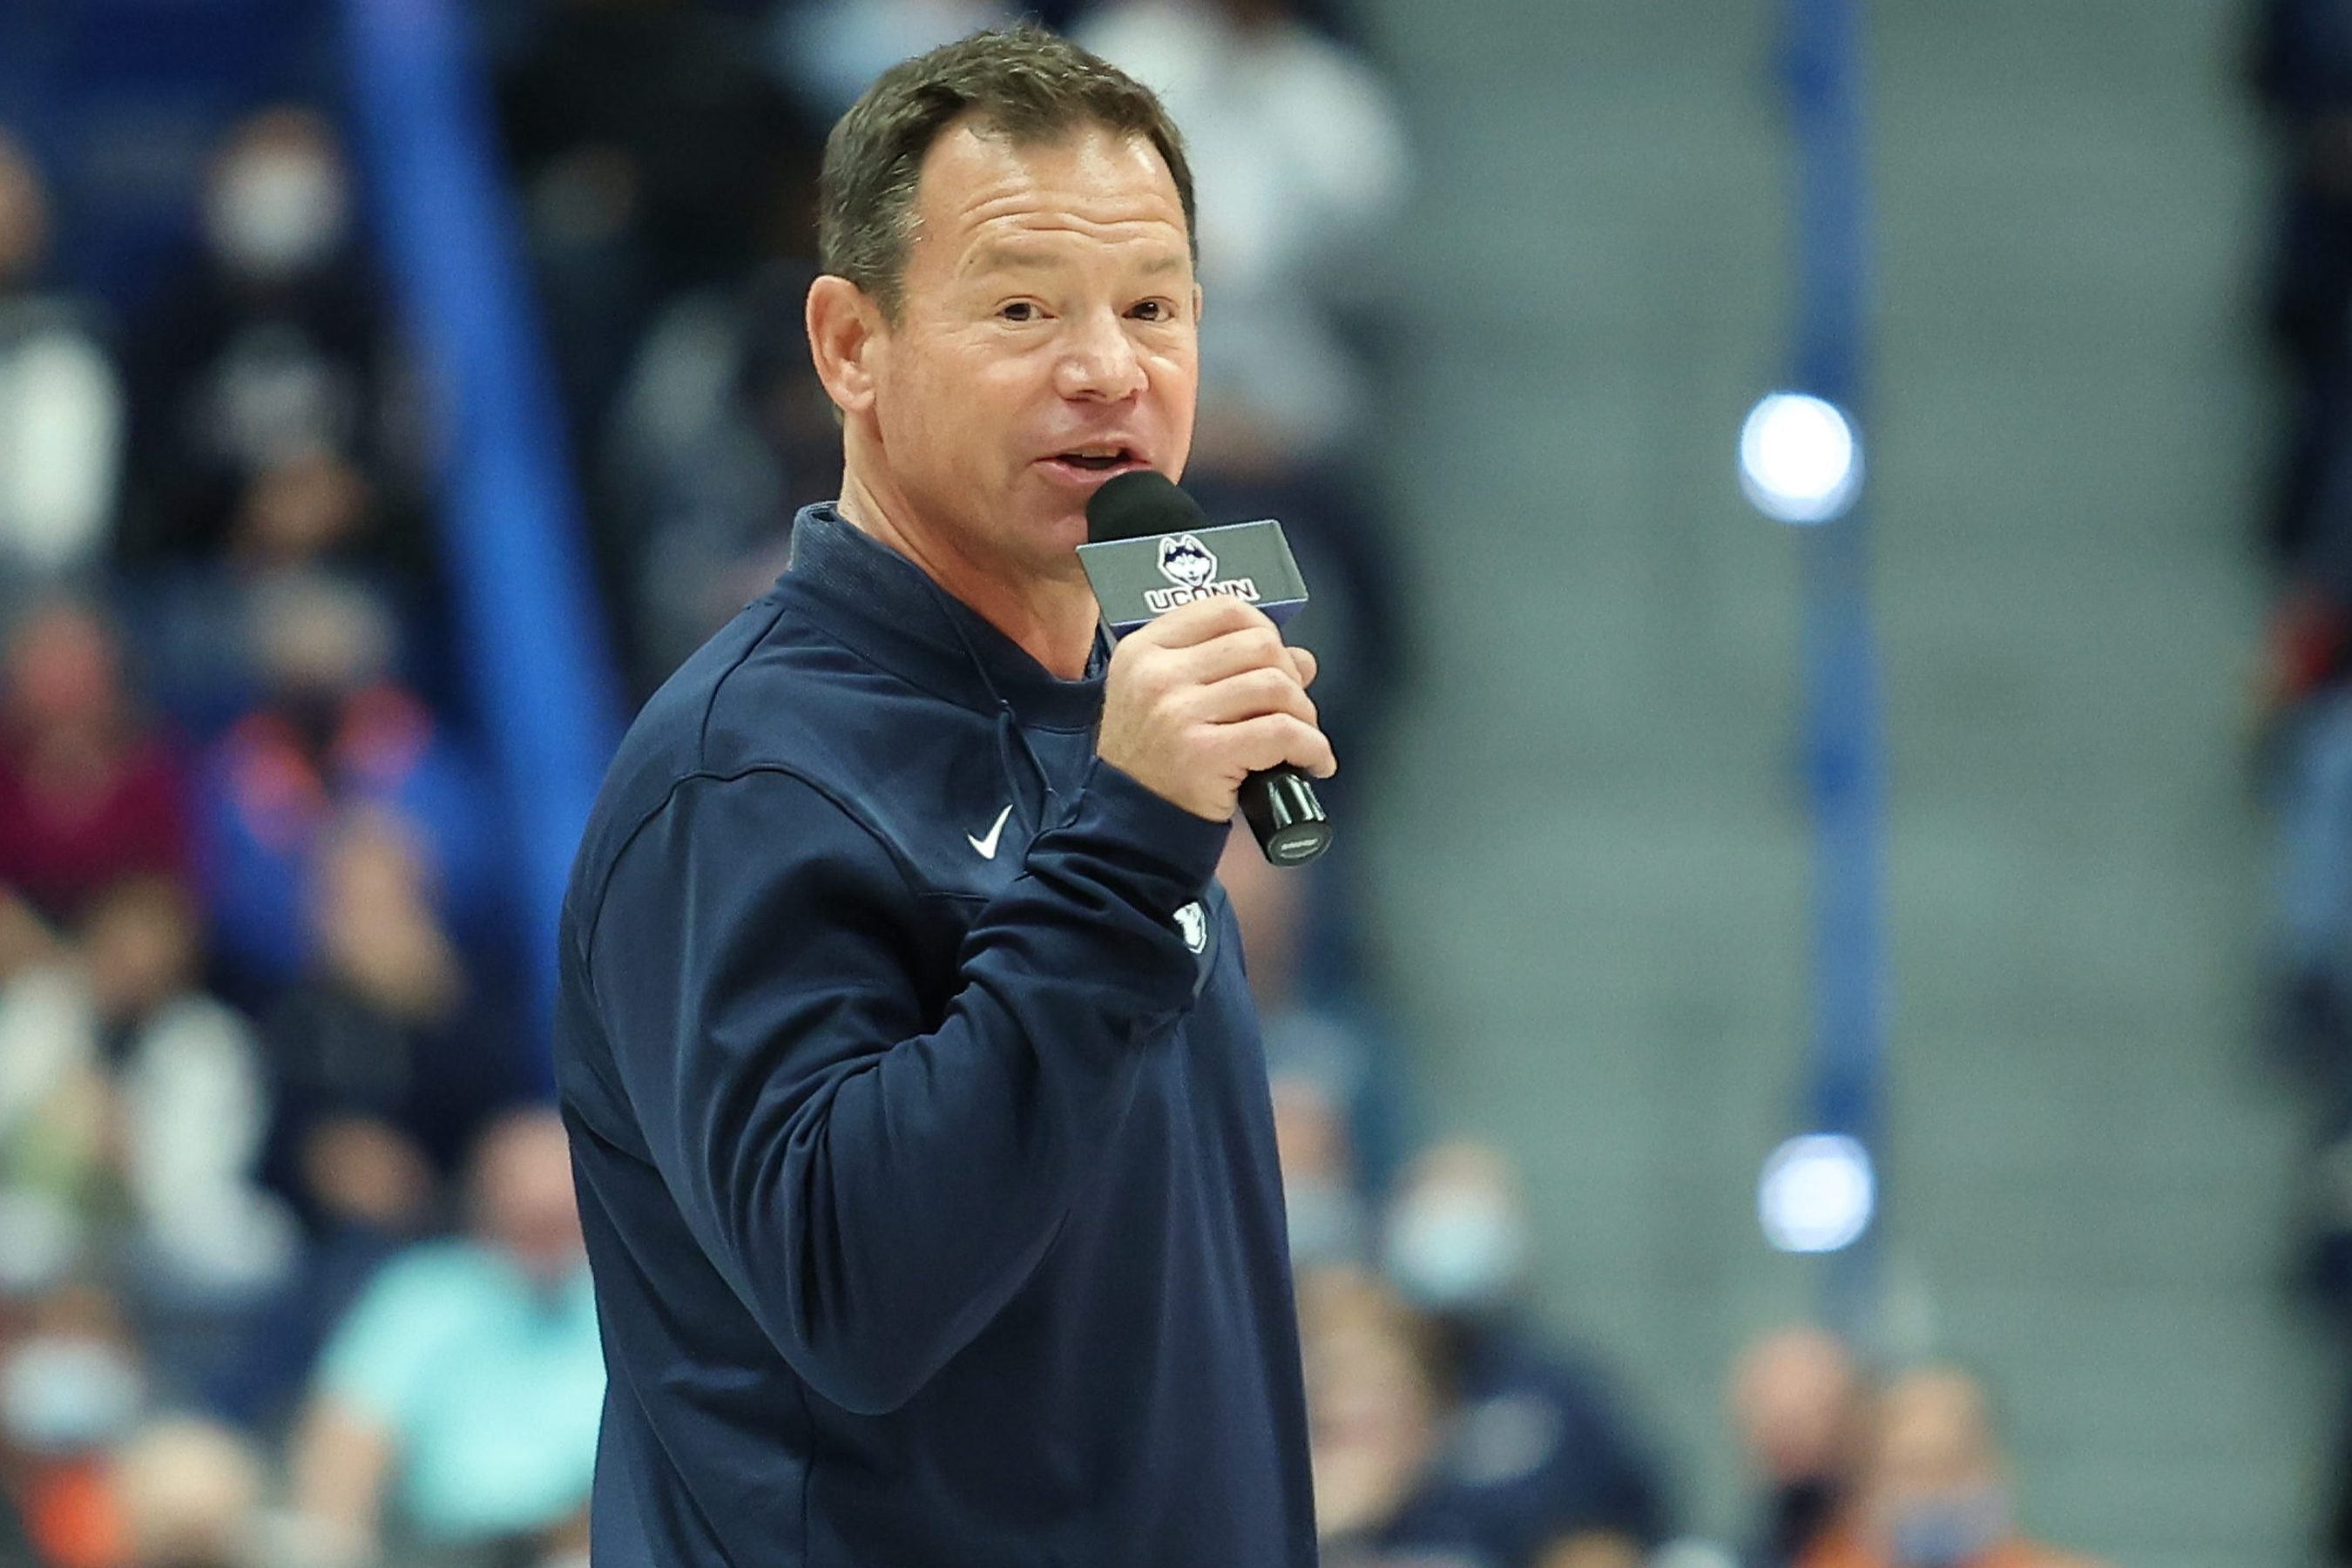 New UConn football coach Jim Mora, Jr. speaks to the crowd at the UConn women’s basketball game at the XL Center on Sunday, November 14, 2021.